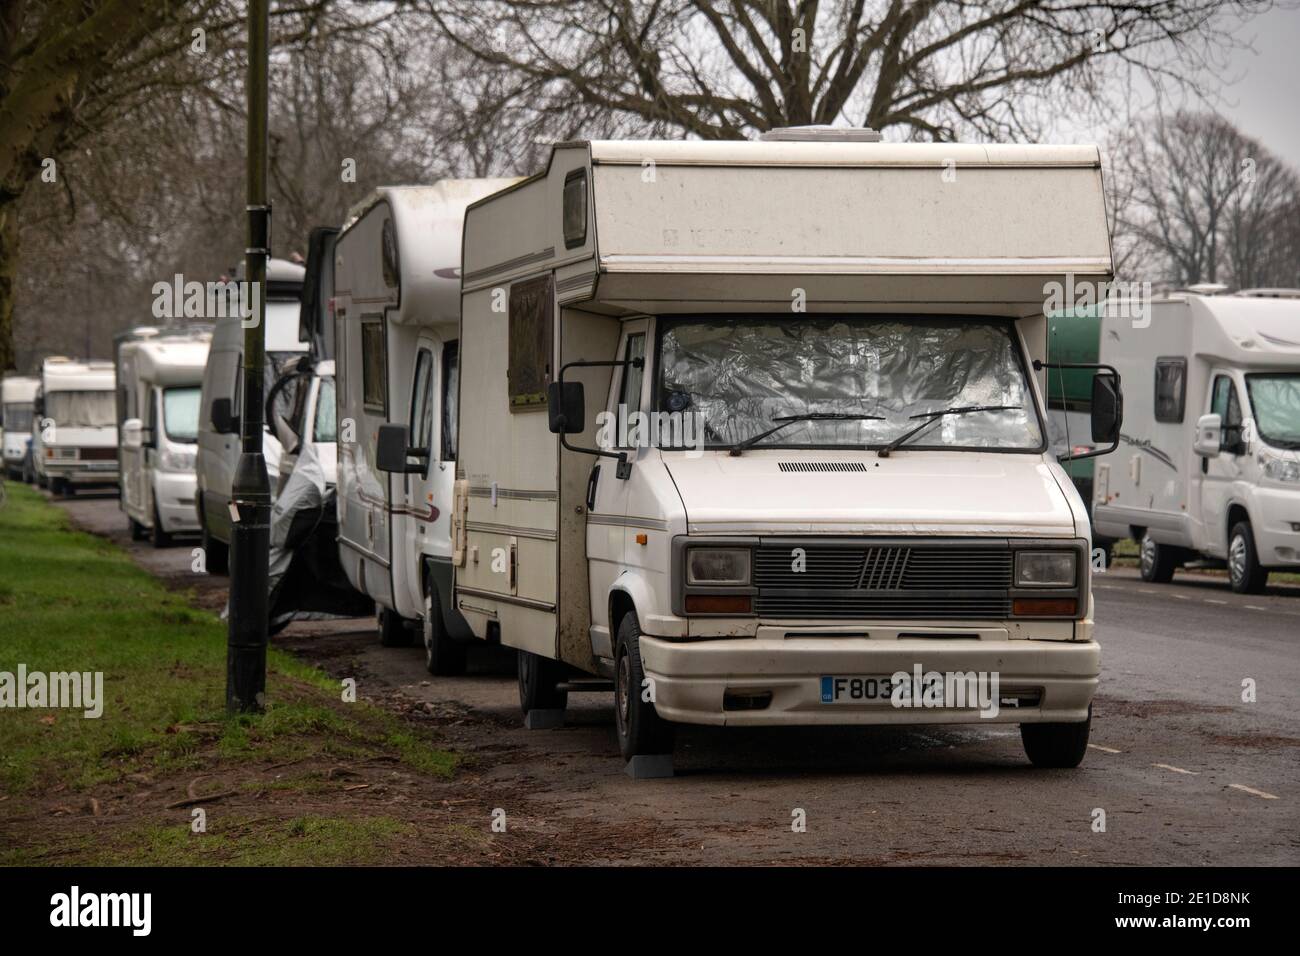 Van dweller community living in camper homes, vans and horse boxes, parked on public roads on Durdham Downs, Westbury-on-Trym, Bristol, UK. Stock Photo